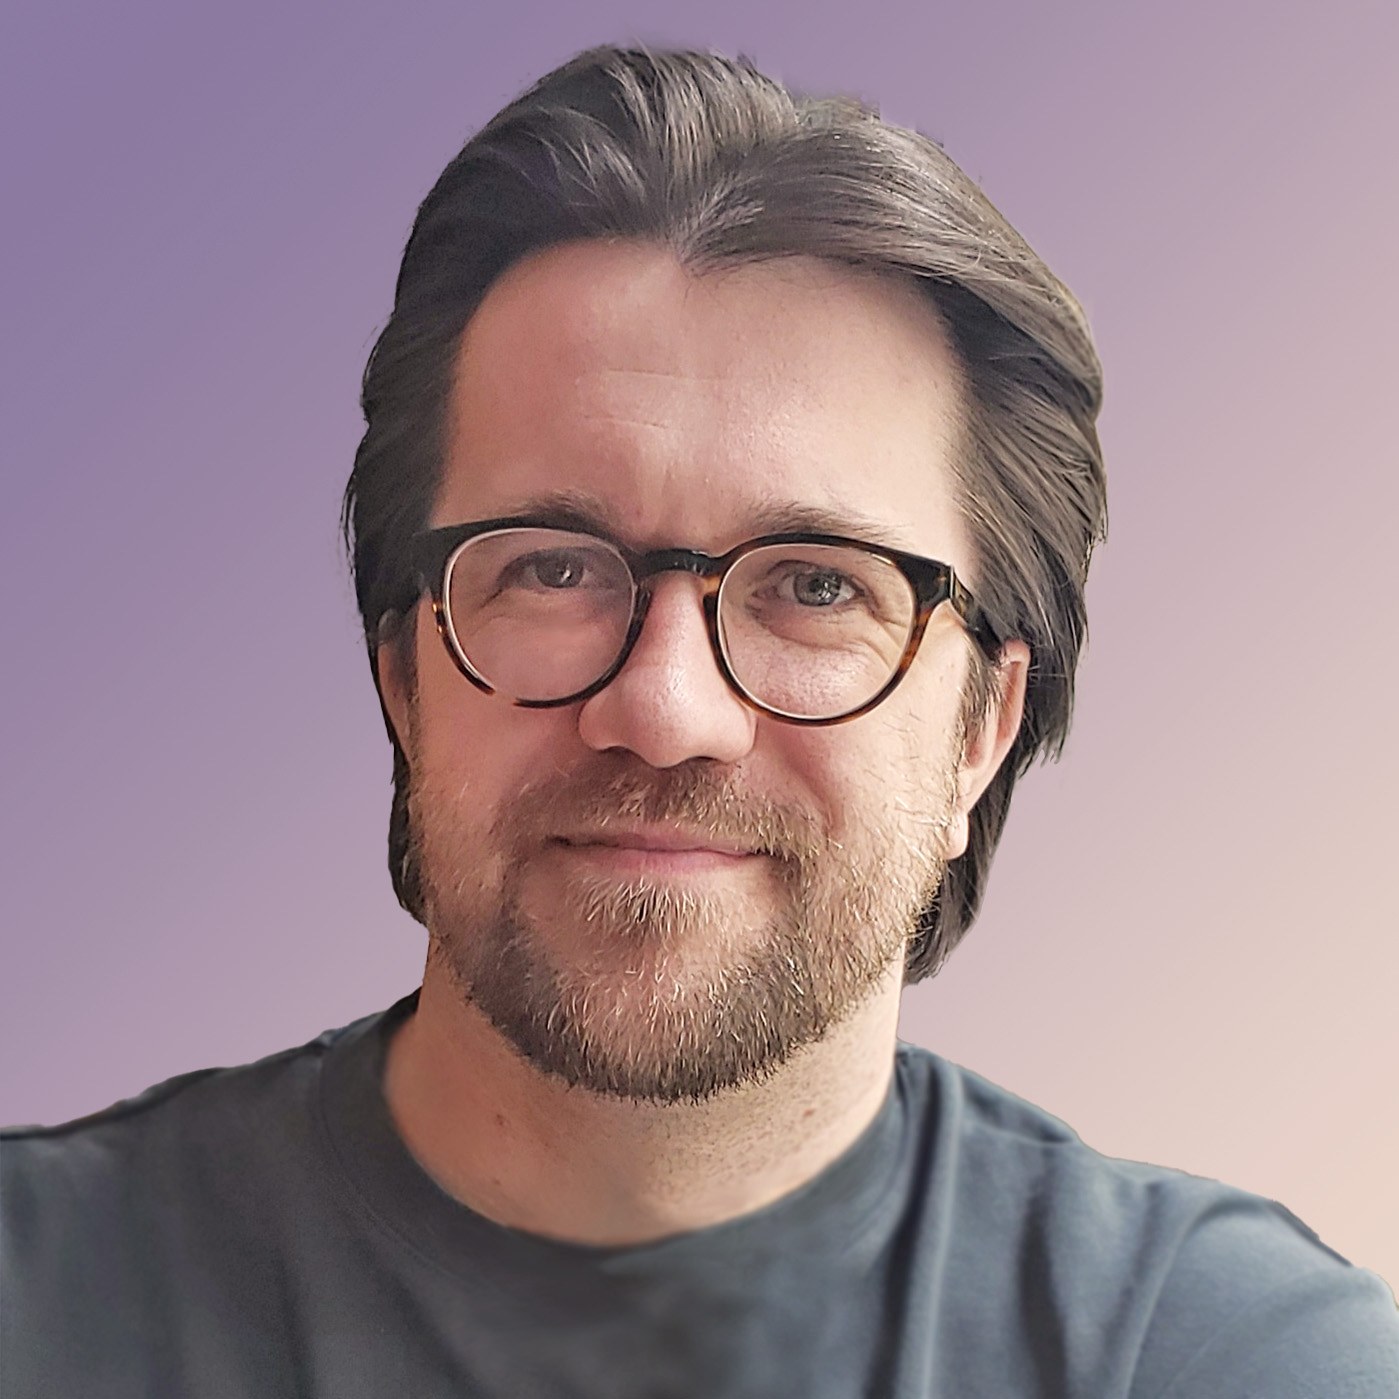 It's me! A white man with medium-length brown hair, glasses, and a black turtleneck.